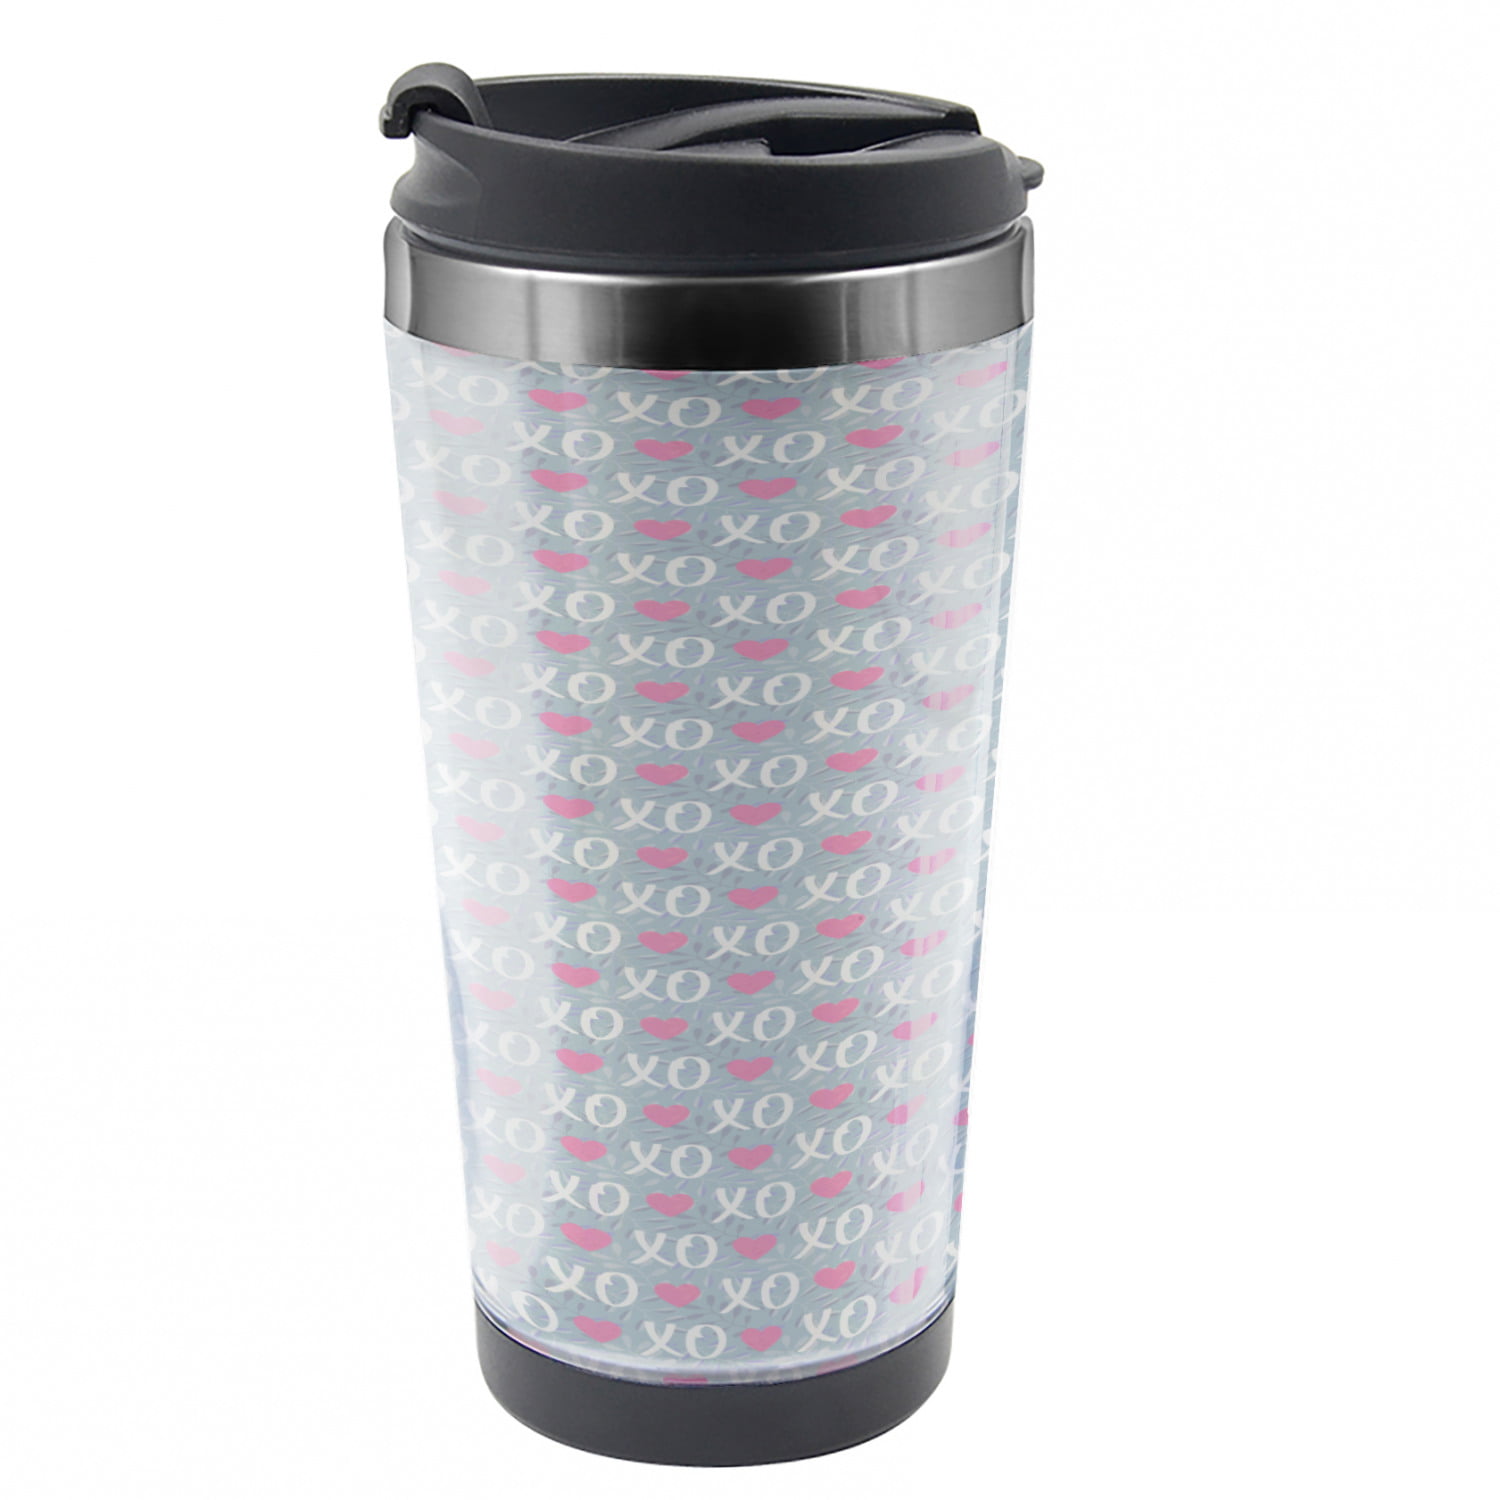 radiator element Niet genoeg Abstract Travel Mug, Valentines Day Concept, Steel Thermal Cup, 16 oz, by  Ambesonne - Walmart.com